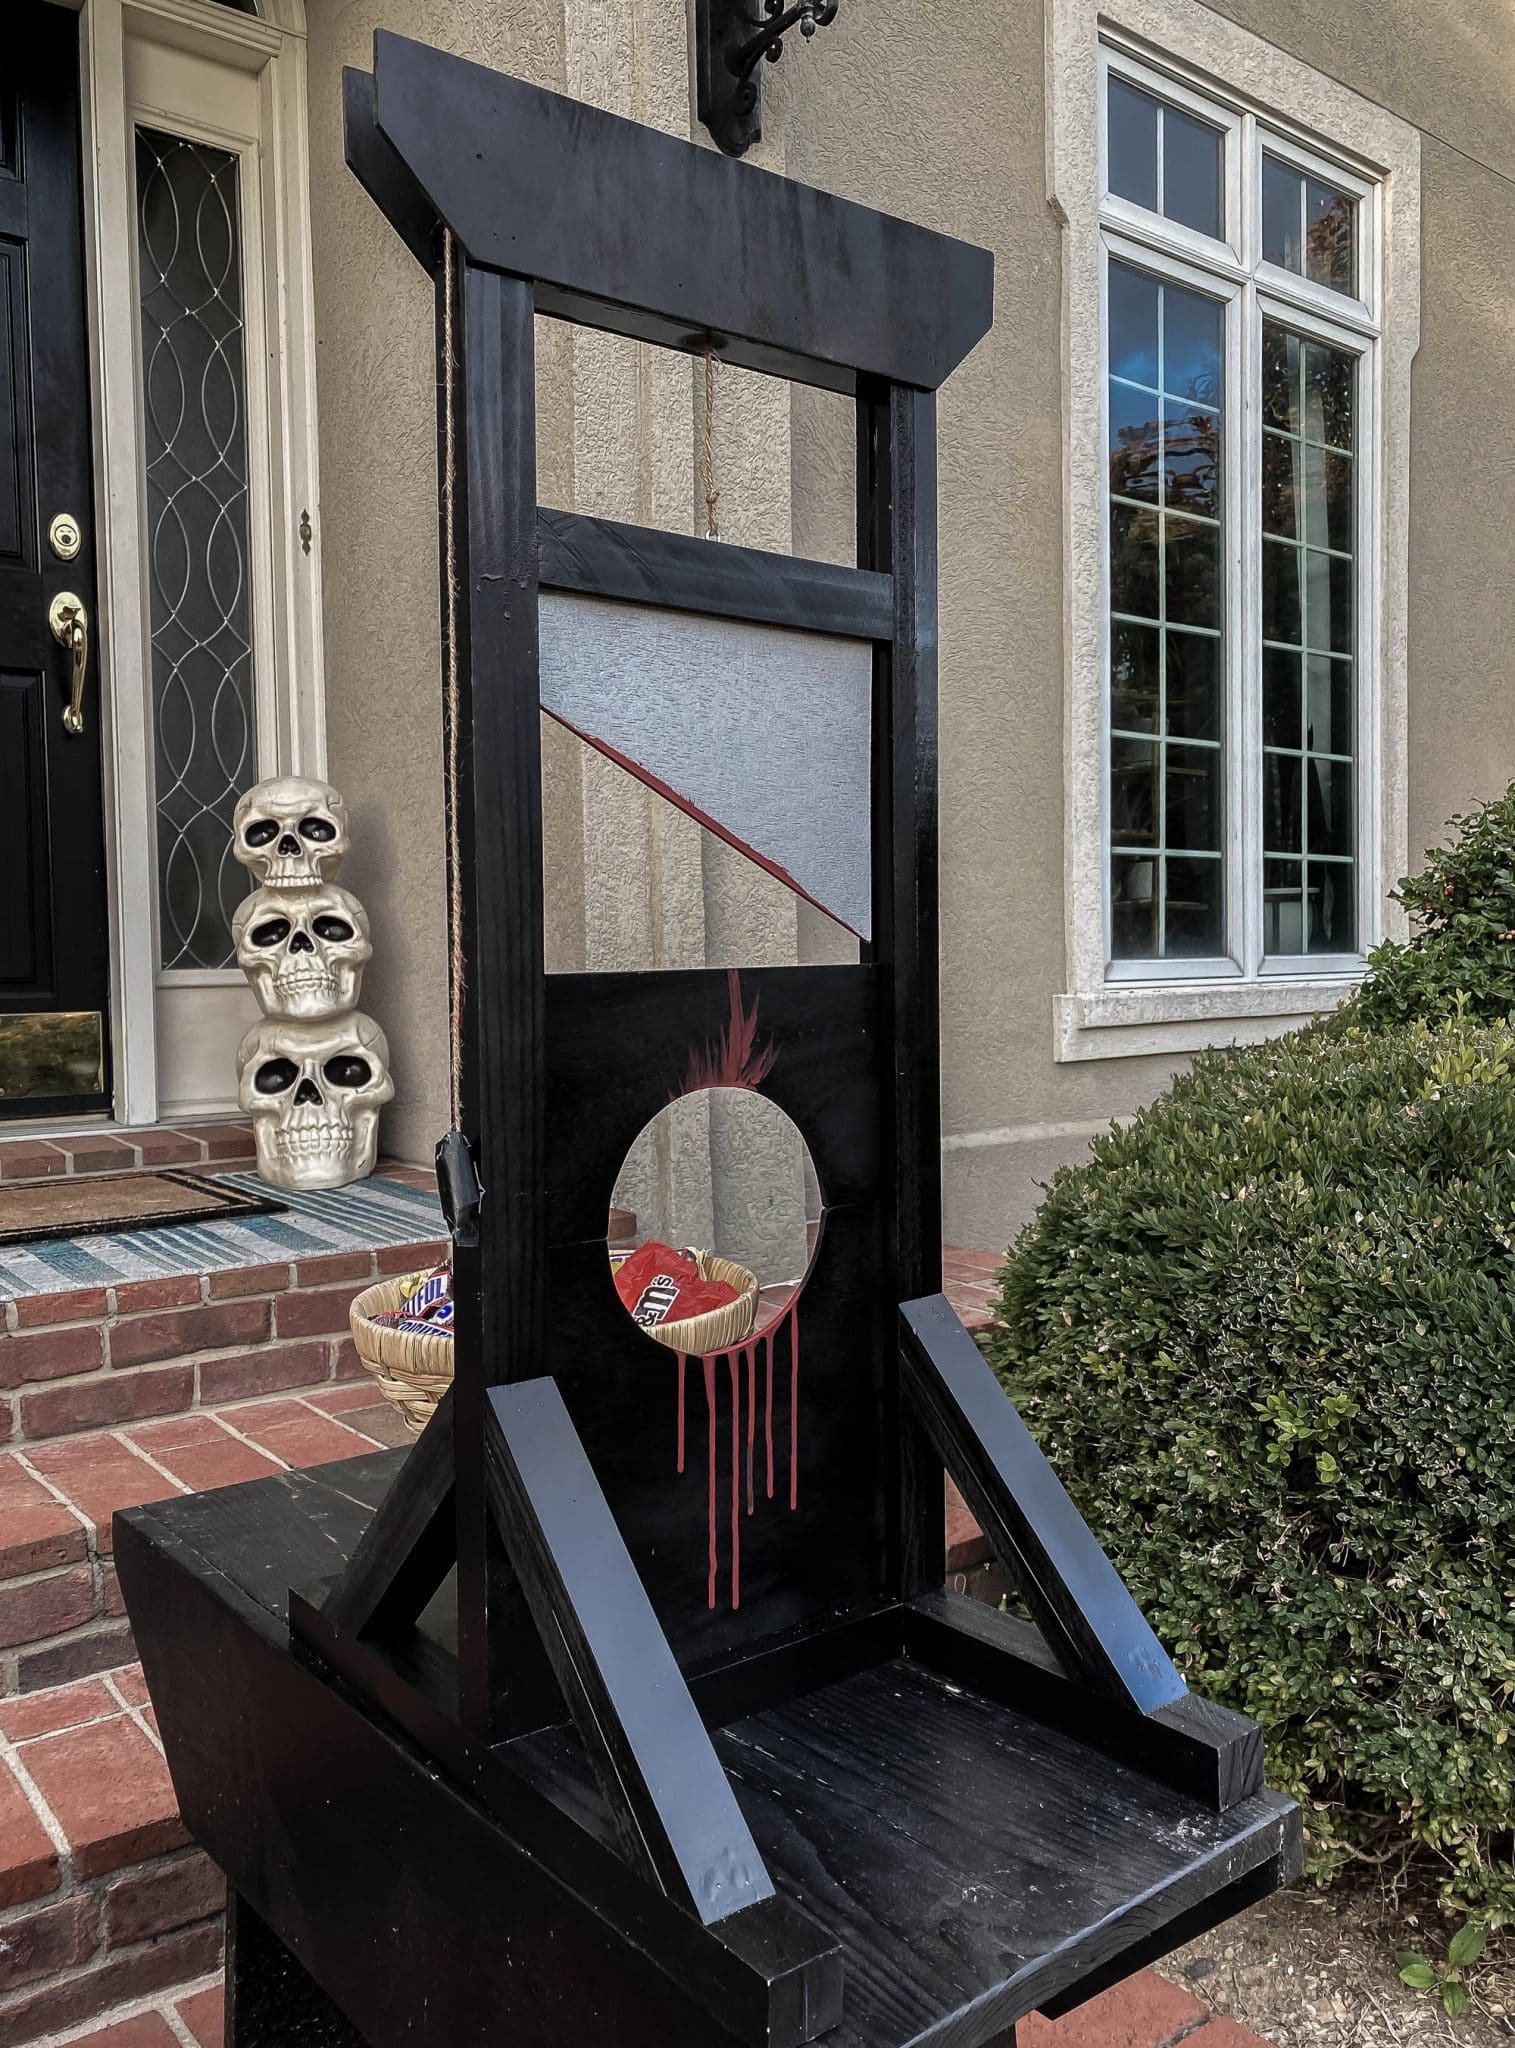 https://jenwoodhouse.com/wp-content/uploads/2022/09/DIY-Guillotine-Halloween-Candy-Bowl-scaled.jpg